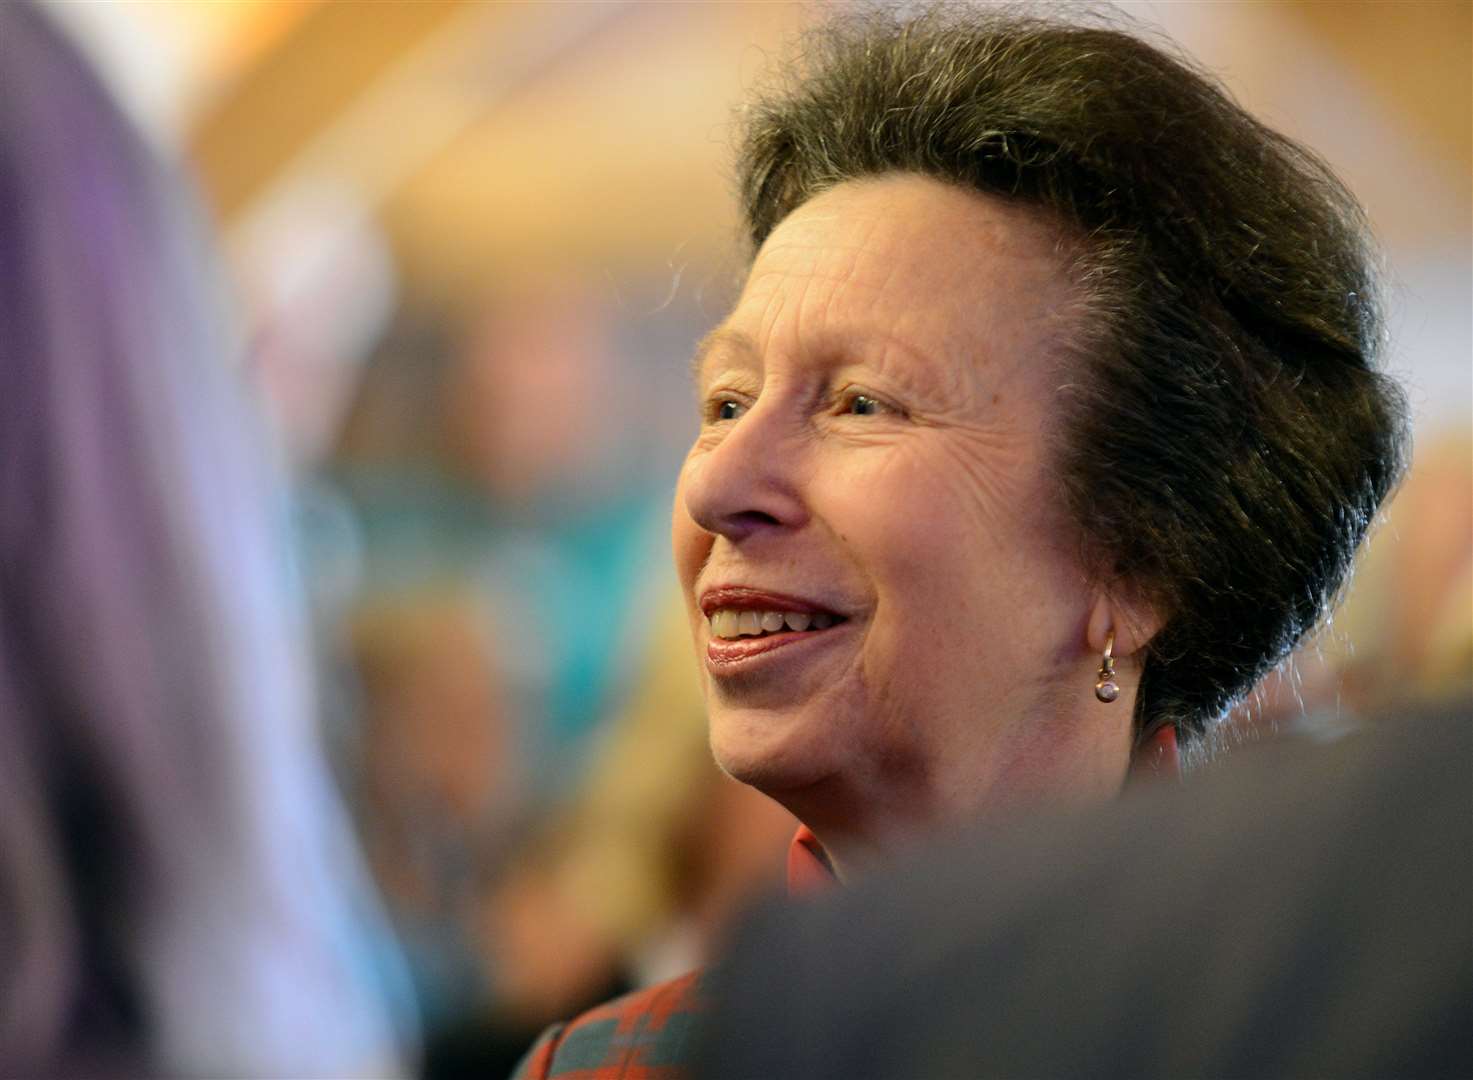 HRH Princess Anne has previously visited the county. Credit to Vikki Lince